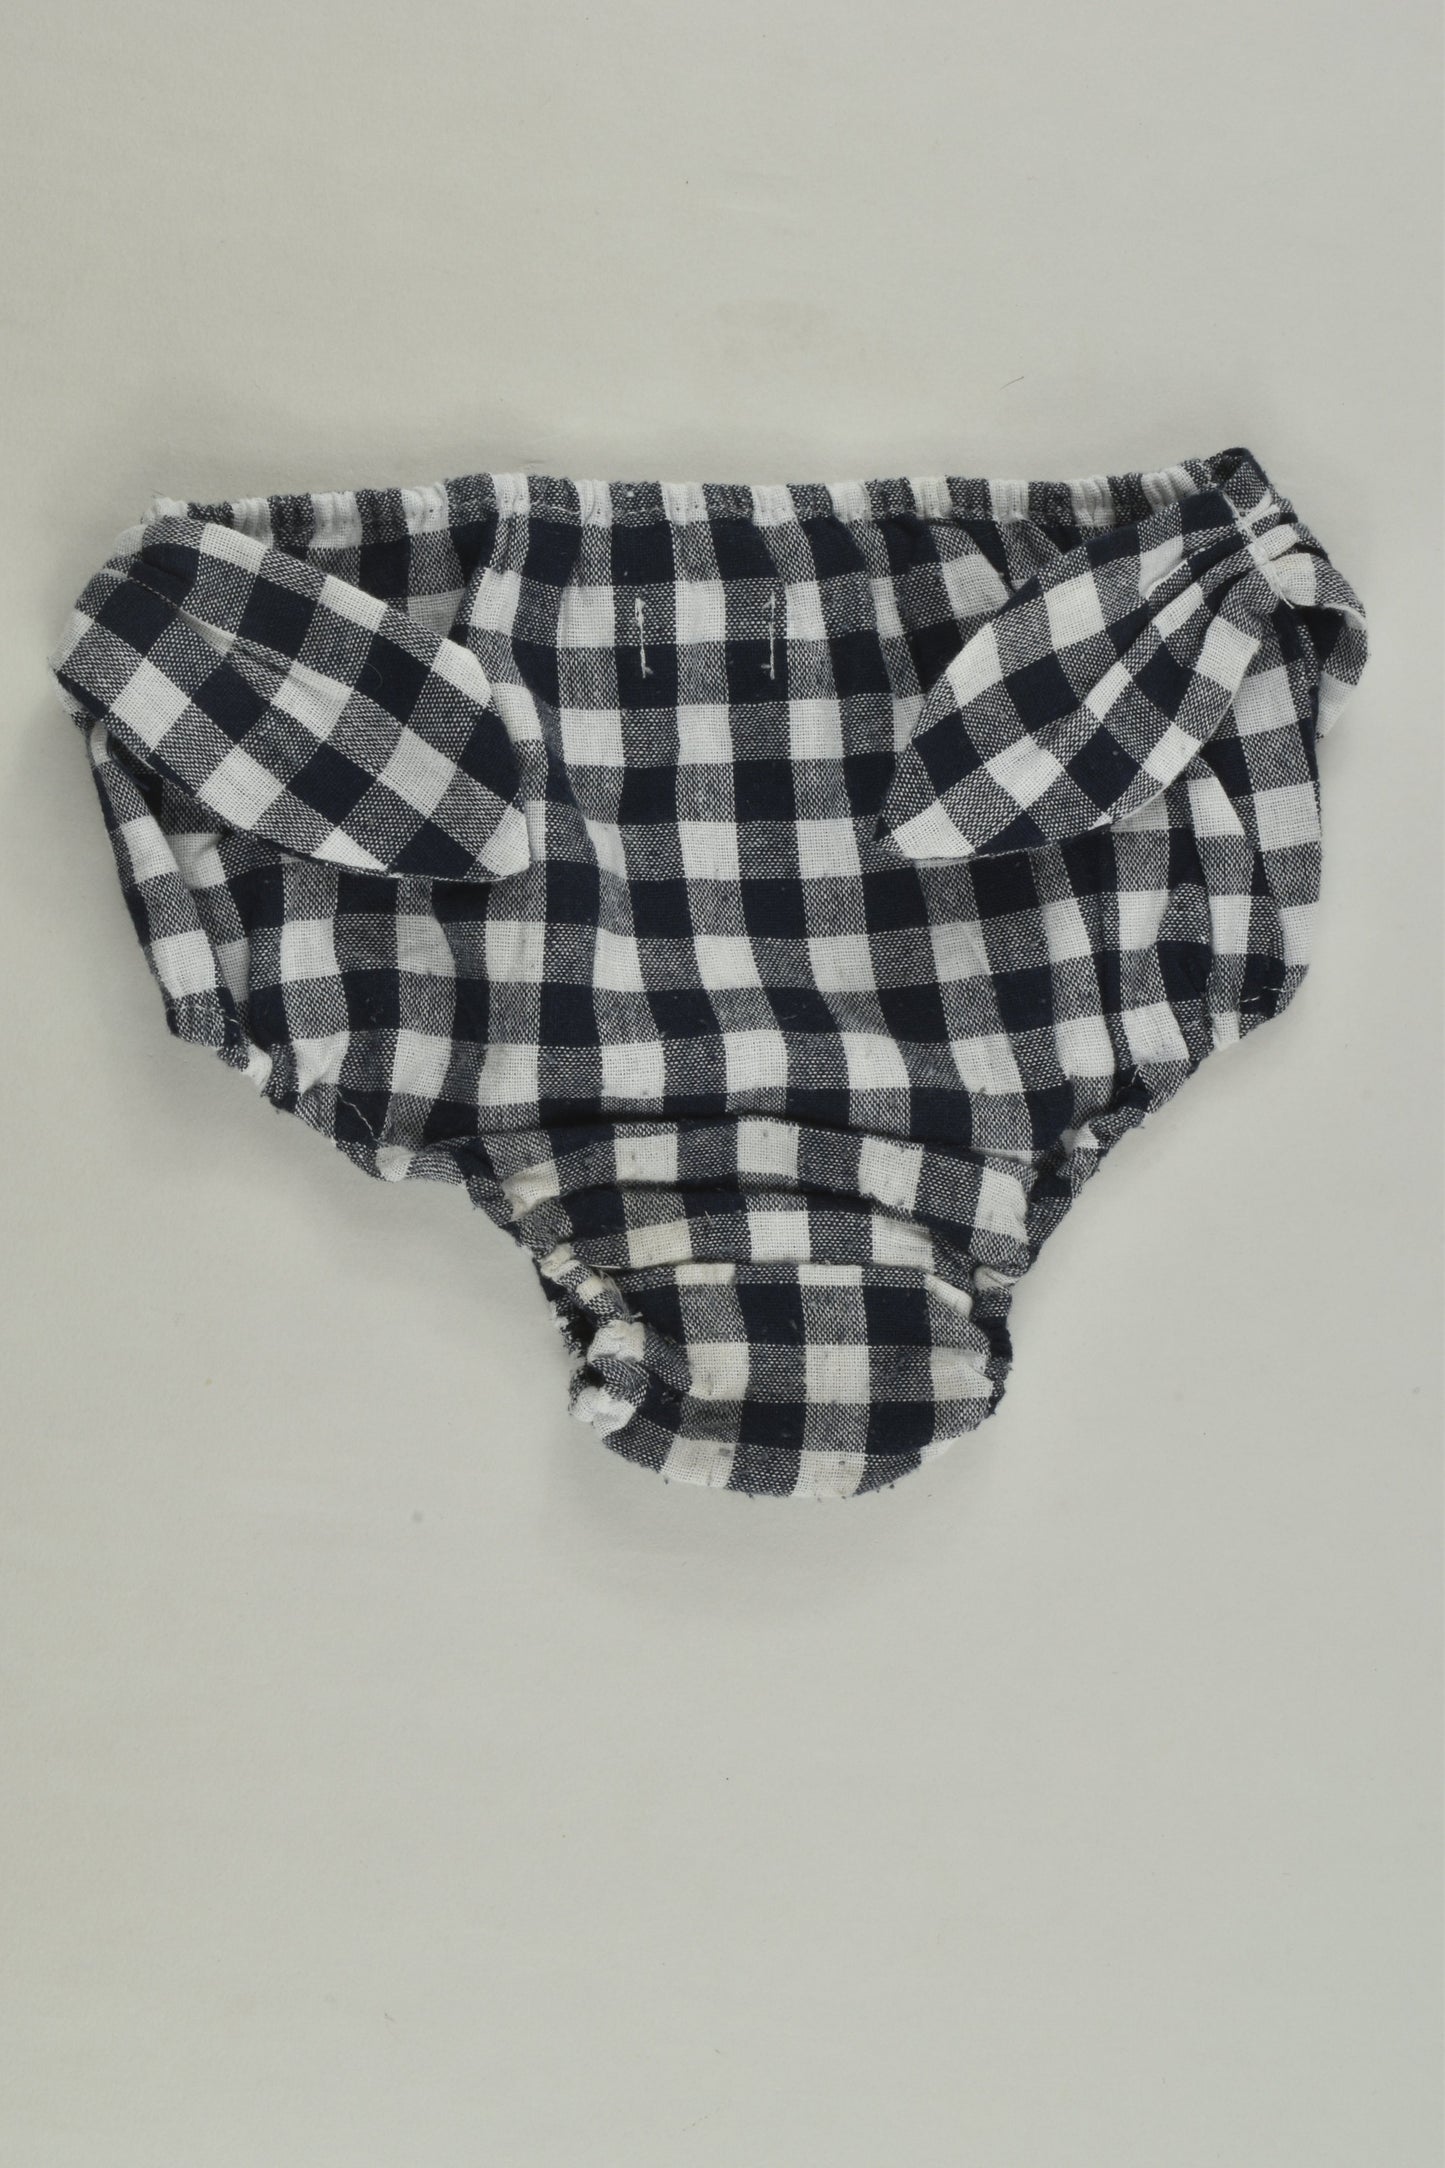 Peggy Size 0 Checked Bloomers